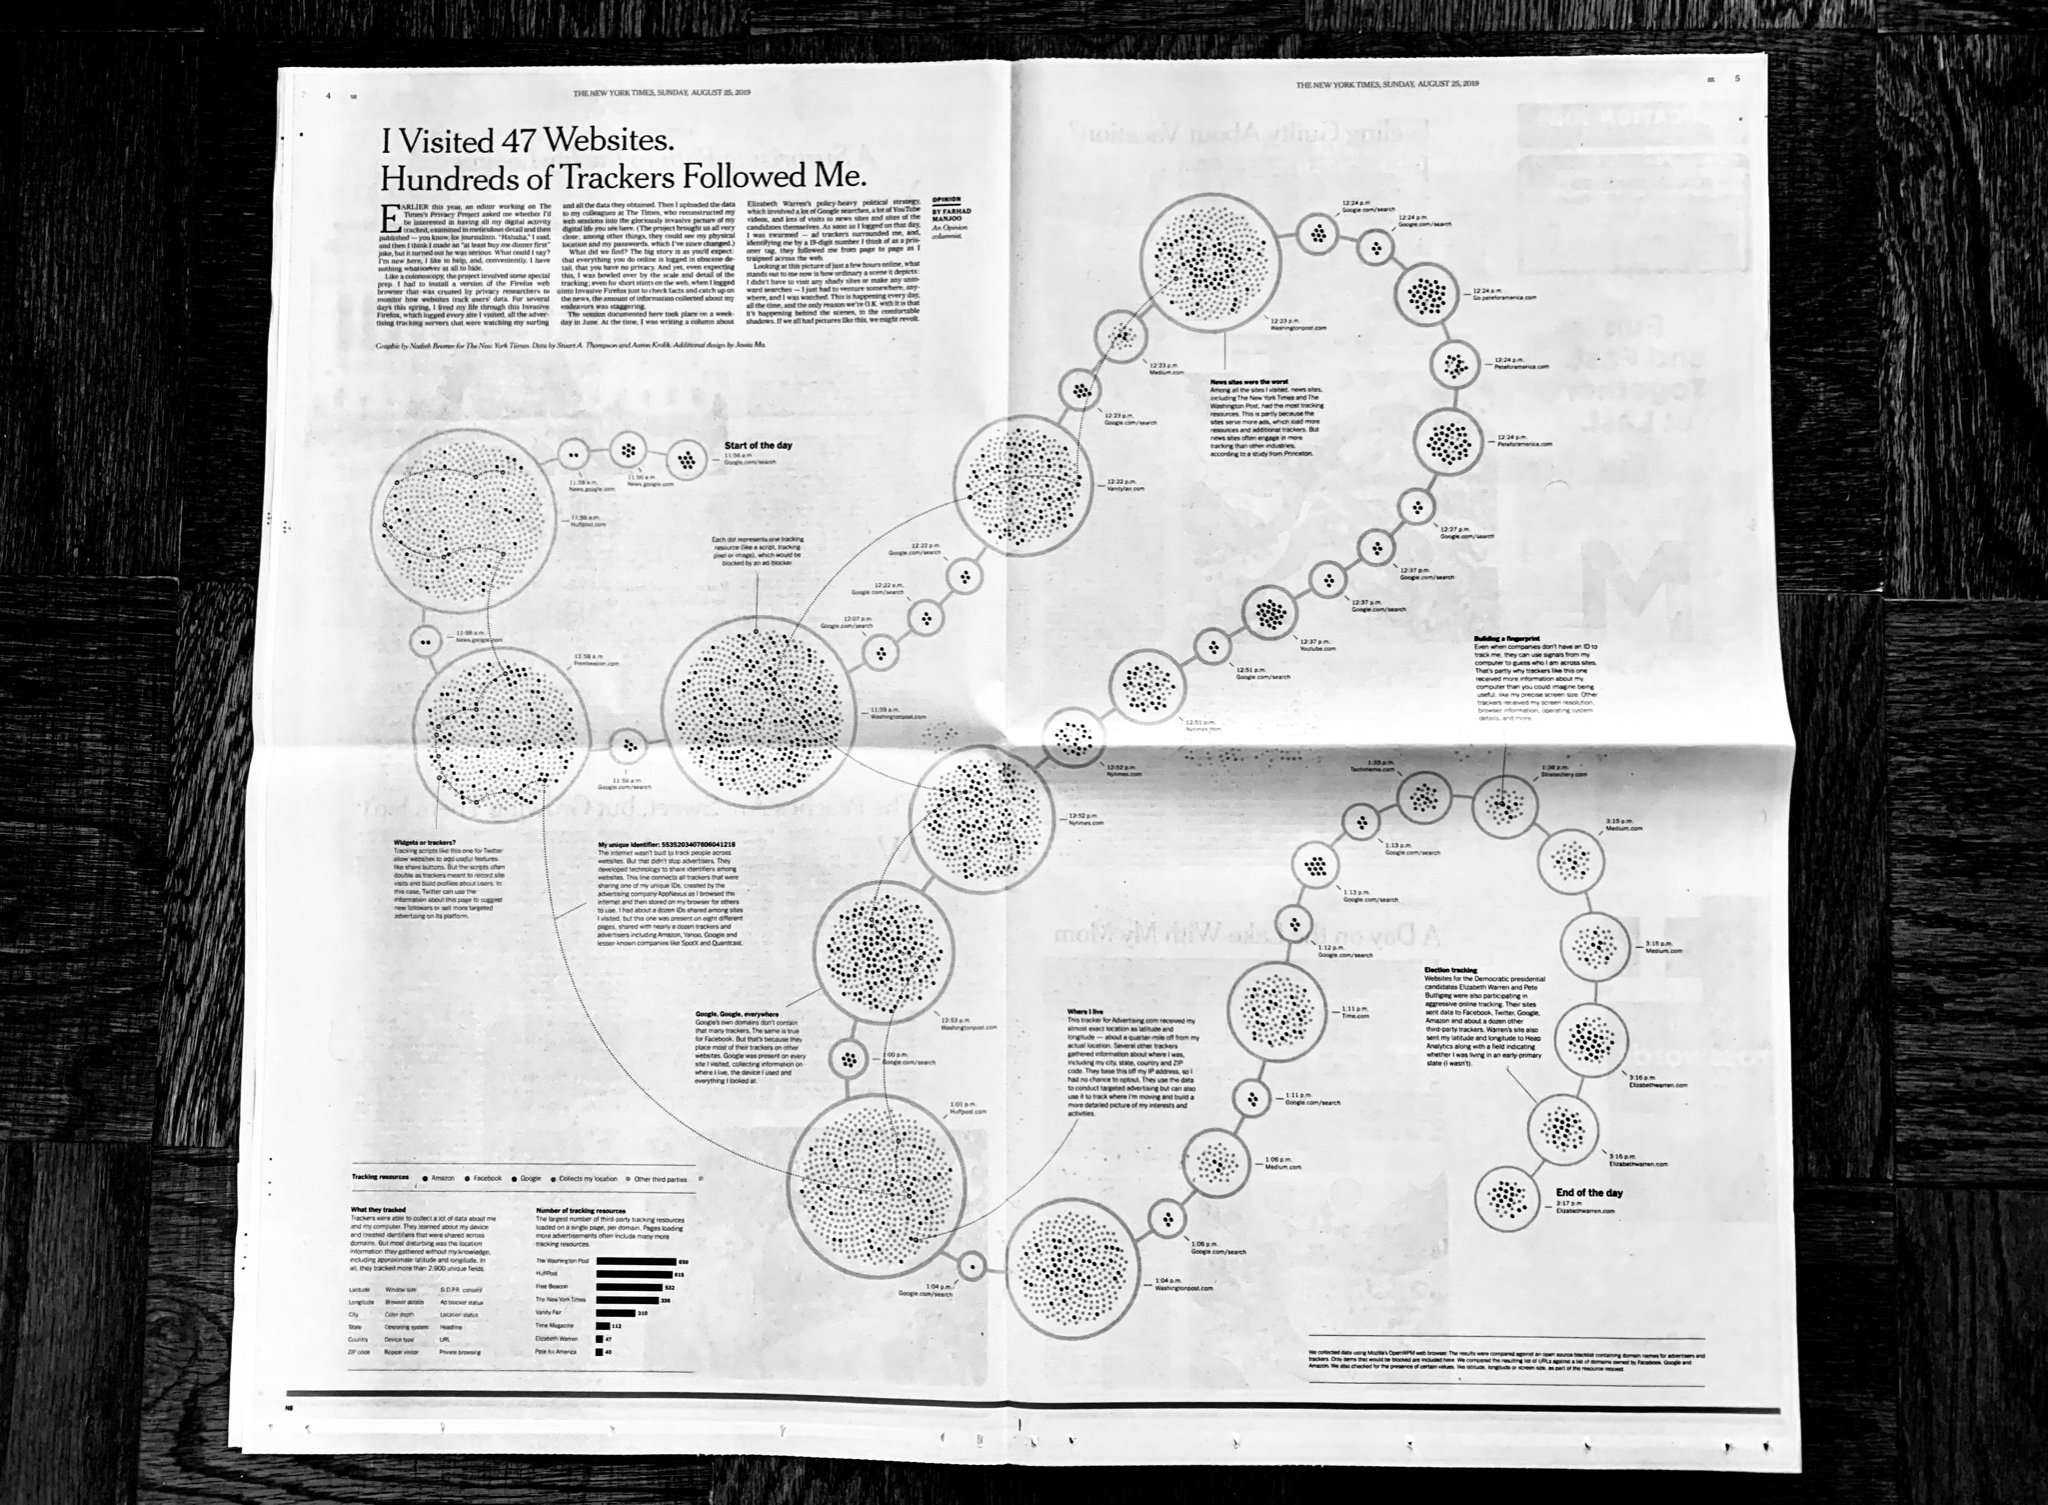 A black and white photo of the data visualization as it appeared in the full page spread of the New York Times Sunday edition of August 25th, 2019